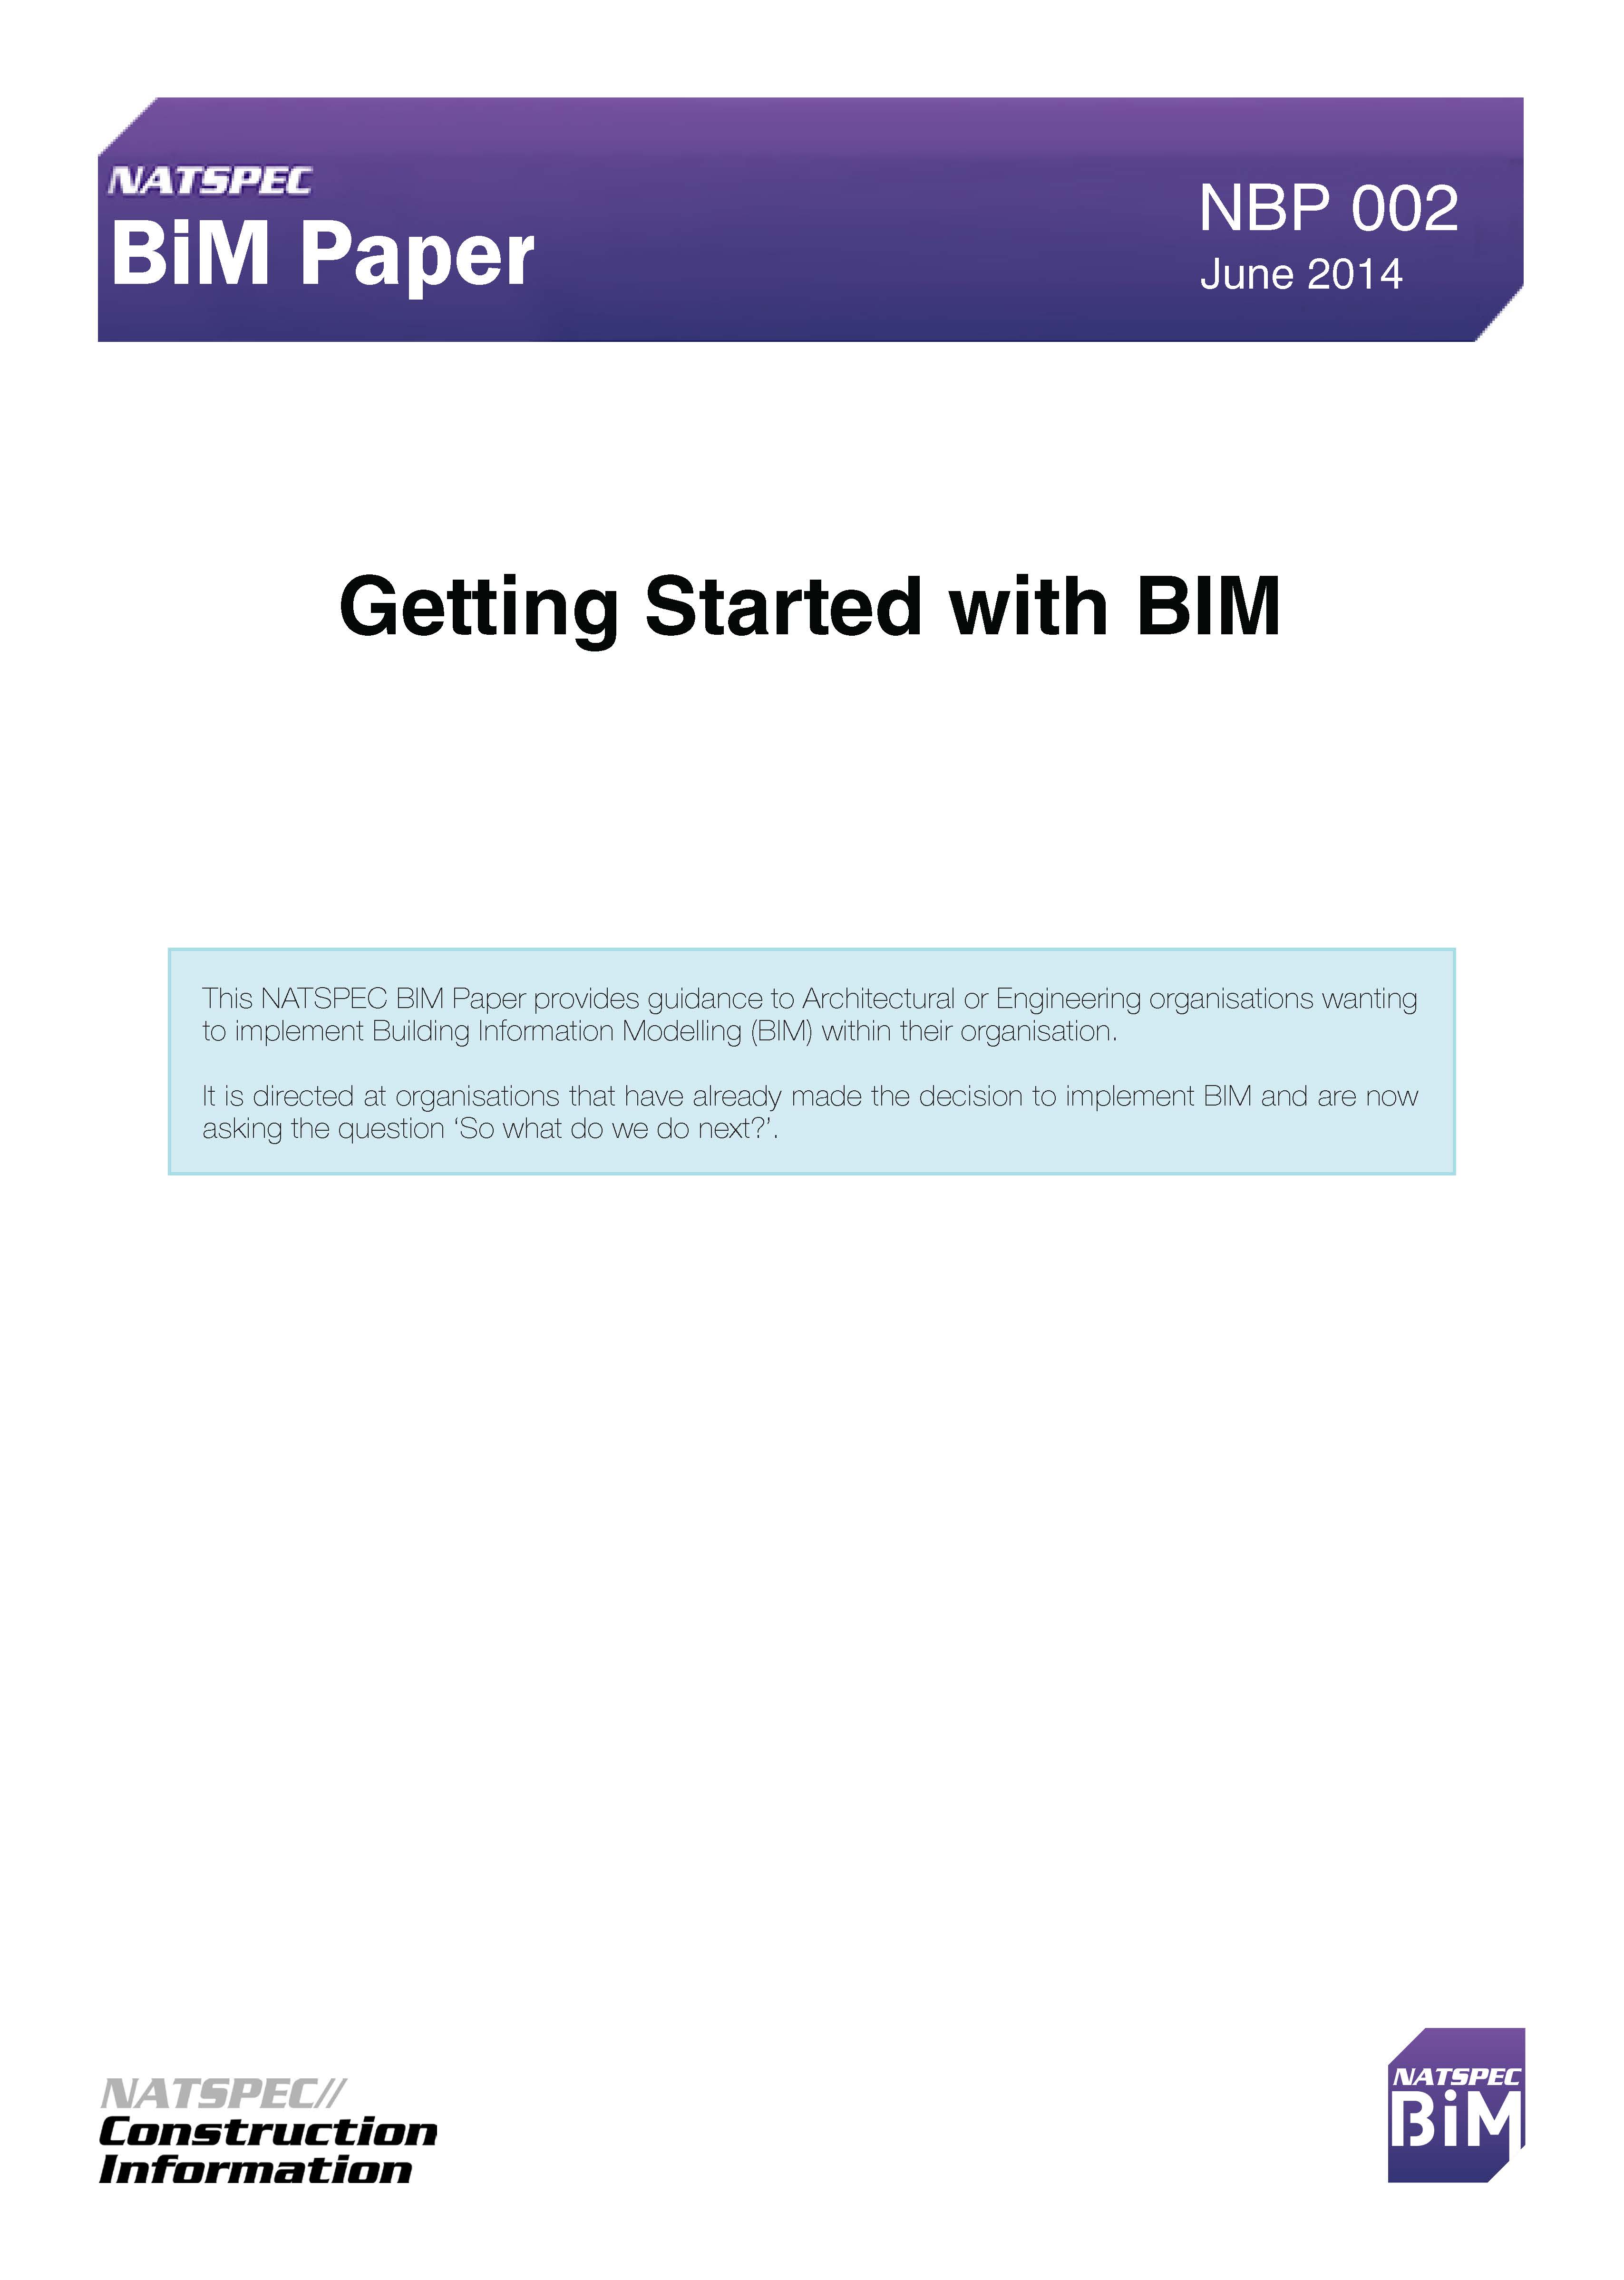 Getting started with BIM